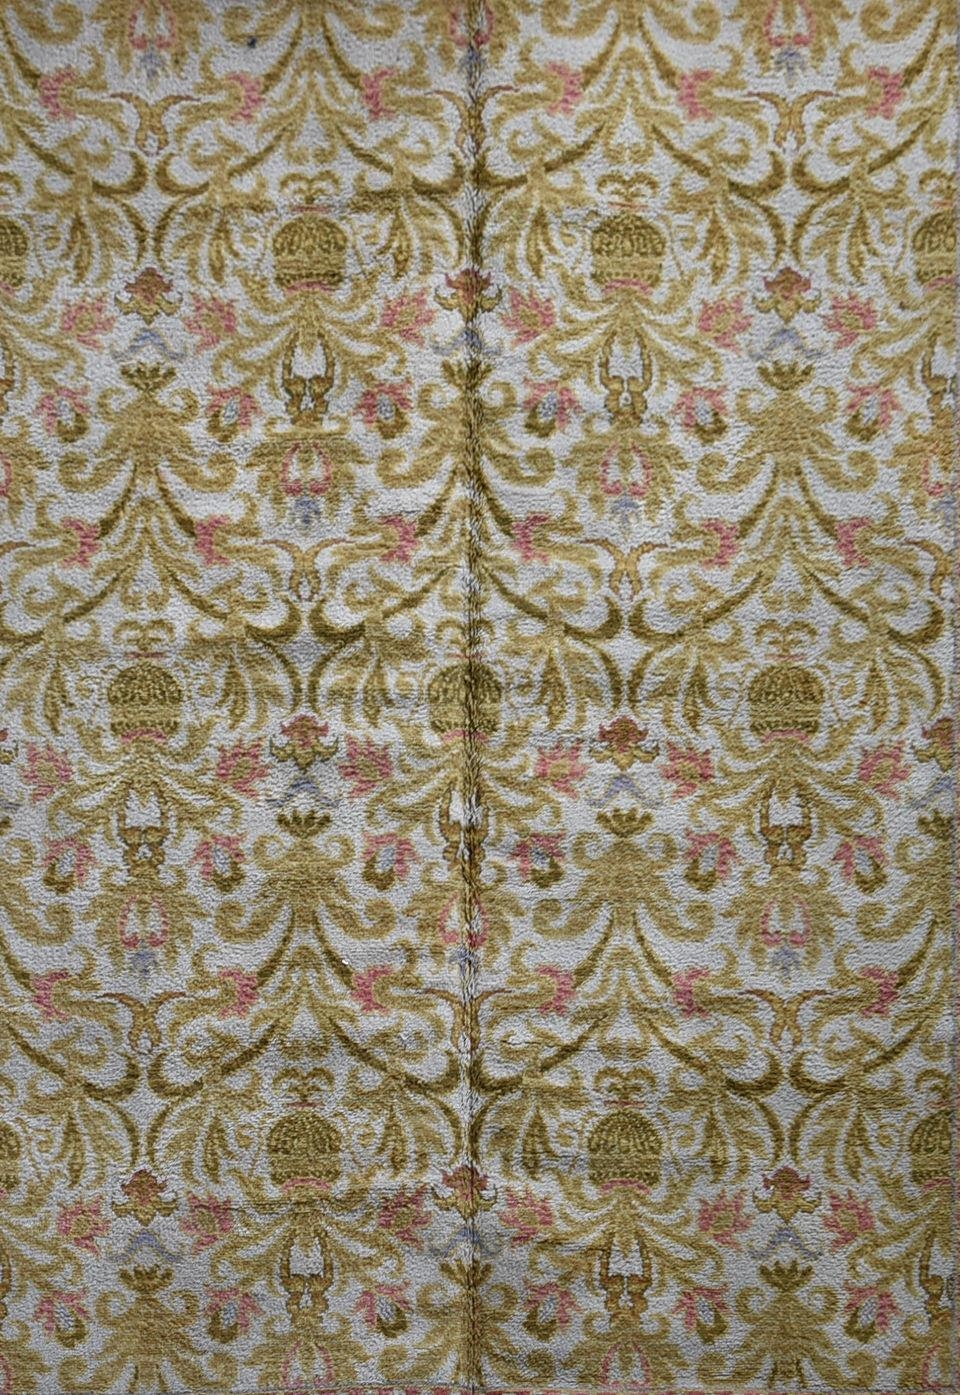 A vintage Spanish carpet with repeating scrolling floral design across the fawn field enclosed by - Image 2 of 5